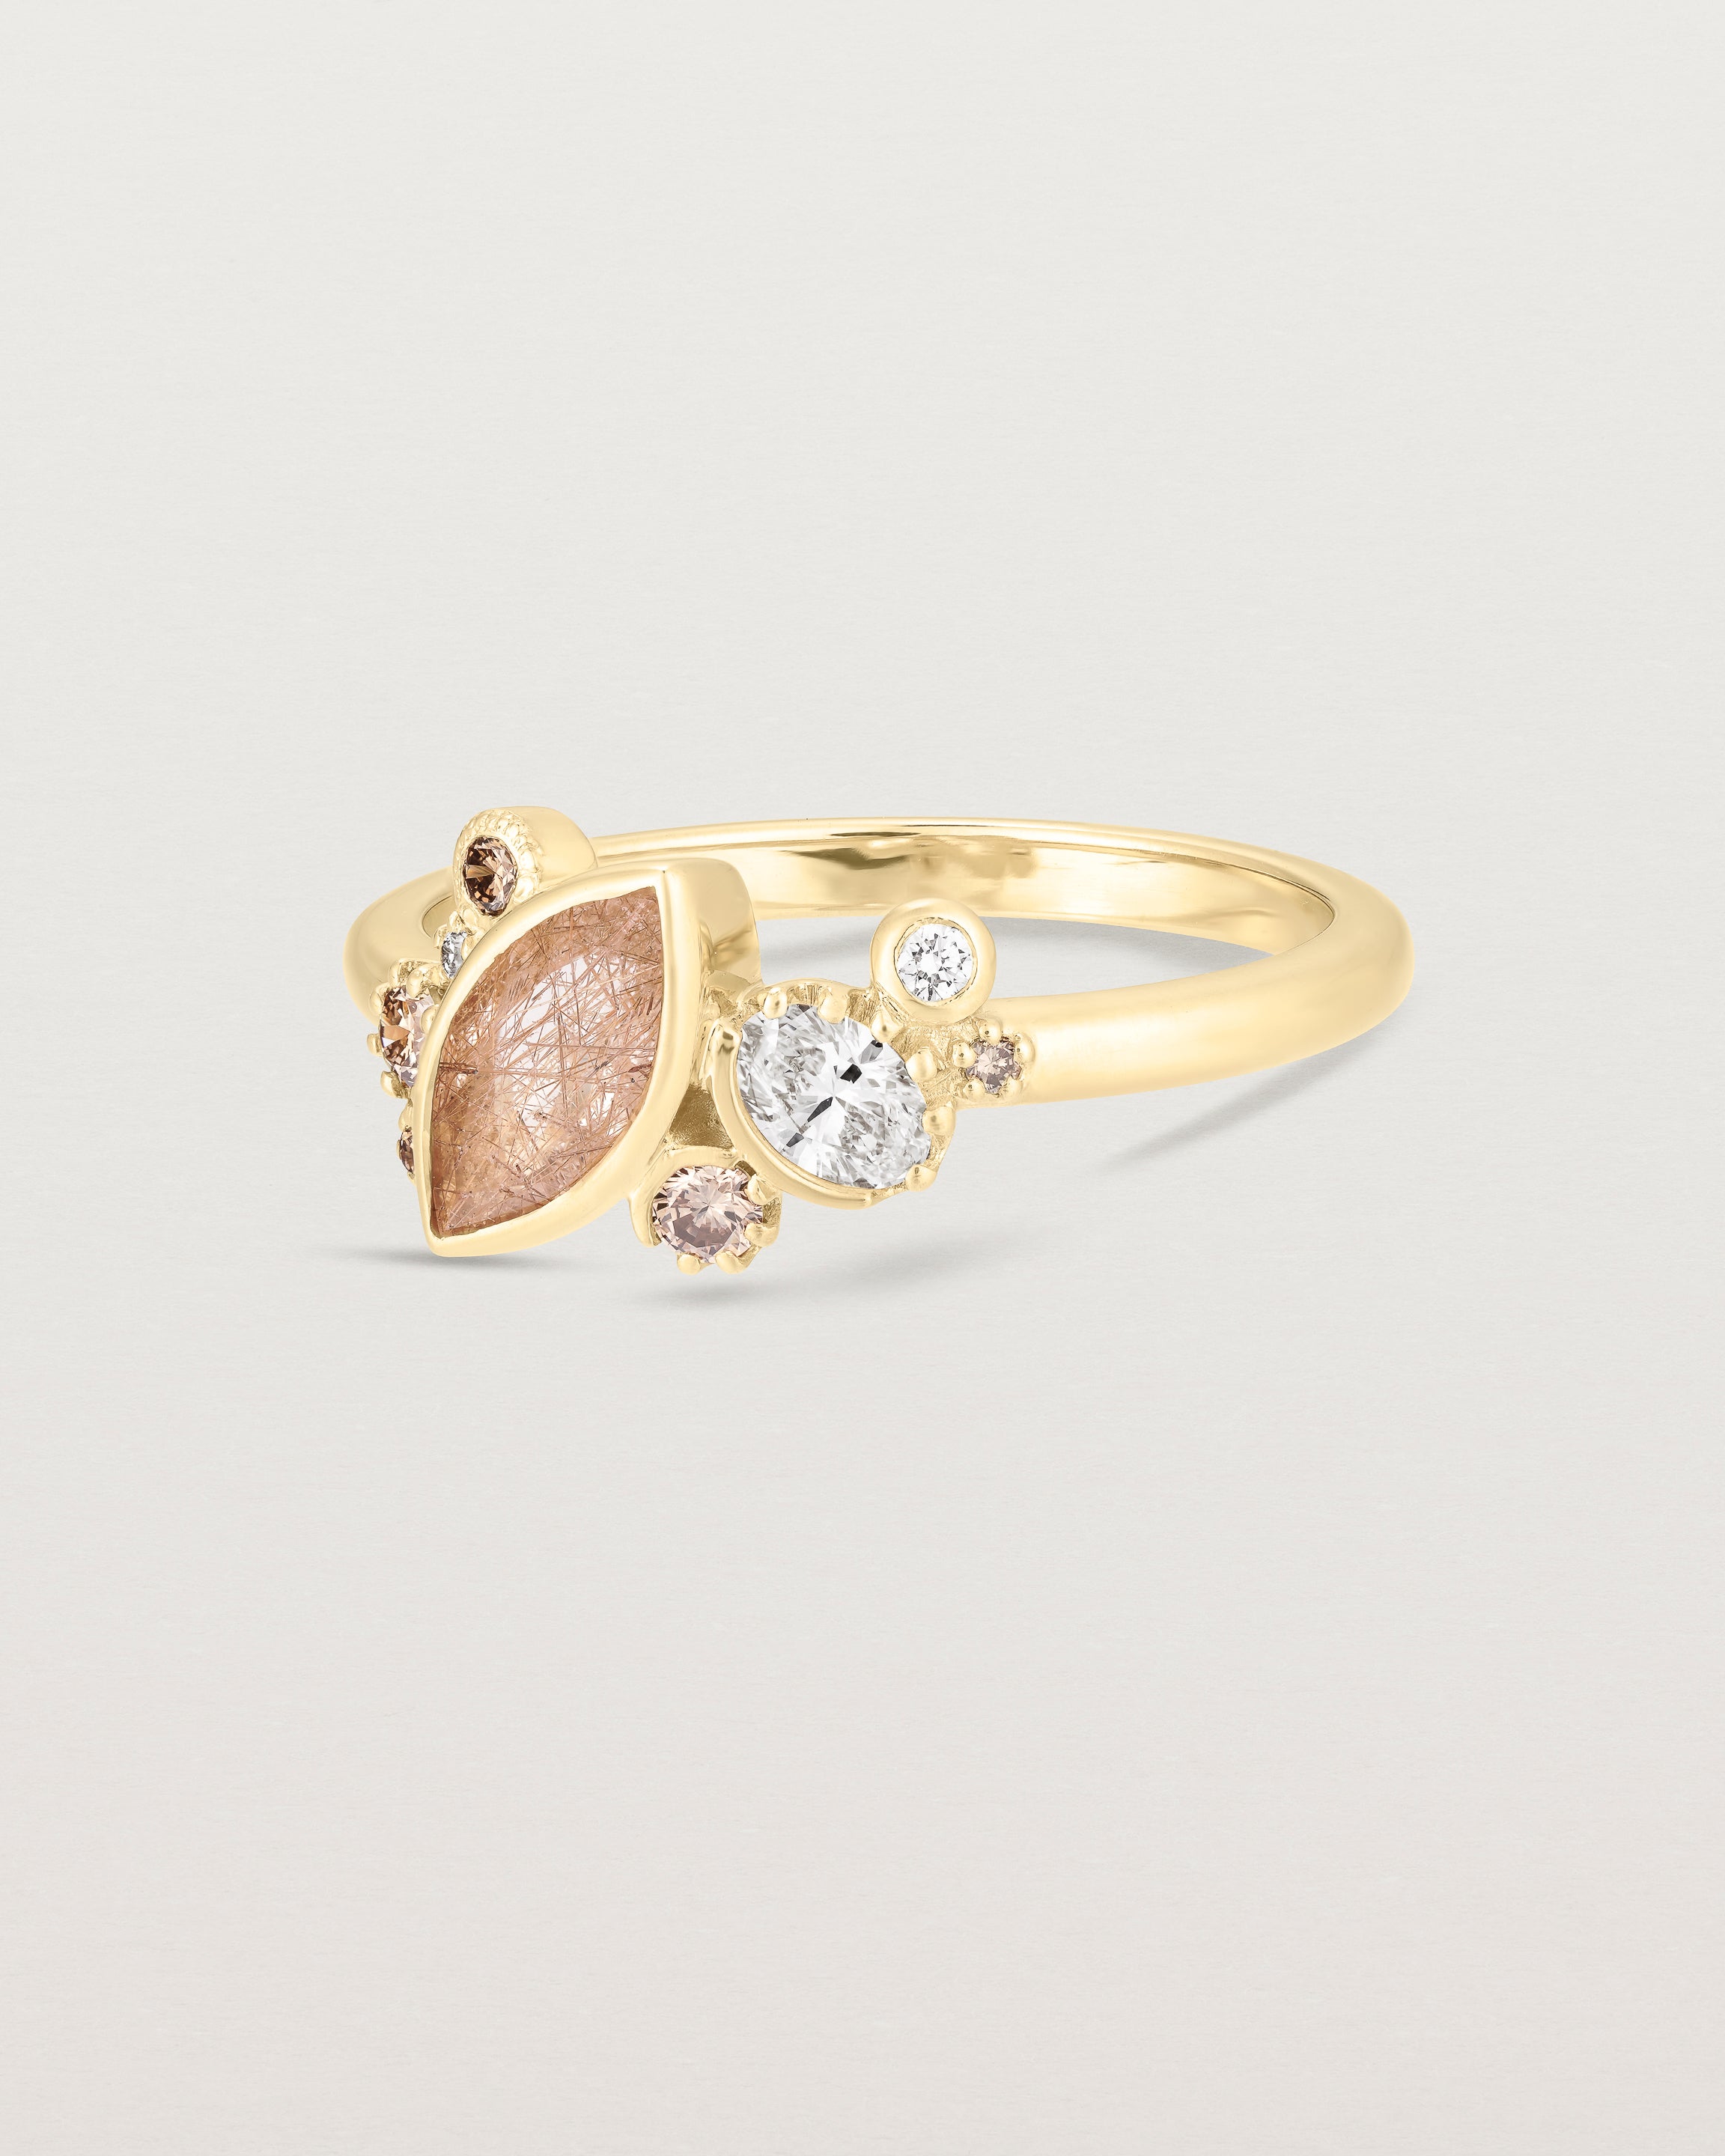 Product image of a yellow gold engagement ring with a rutilated quartz and diamonds, side view.